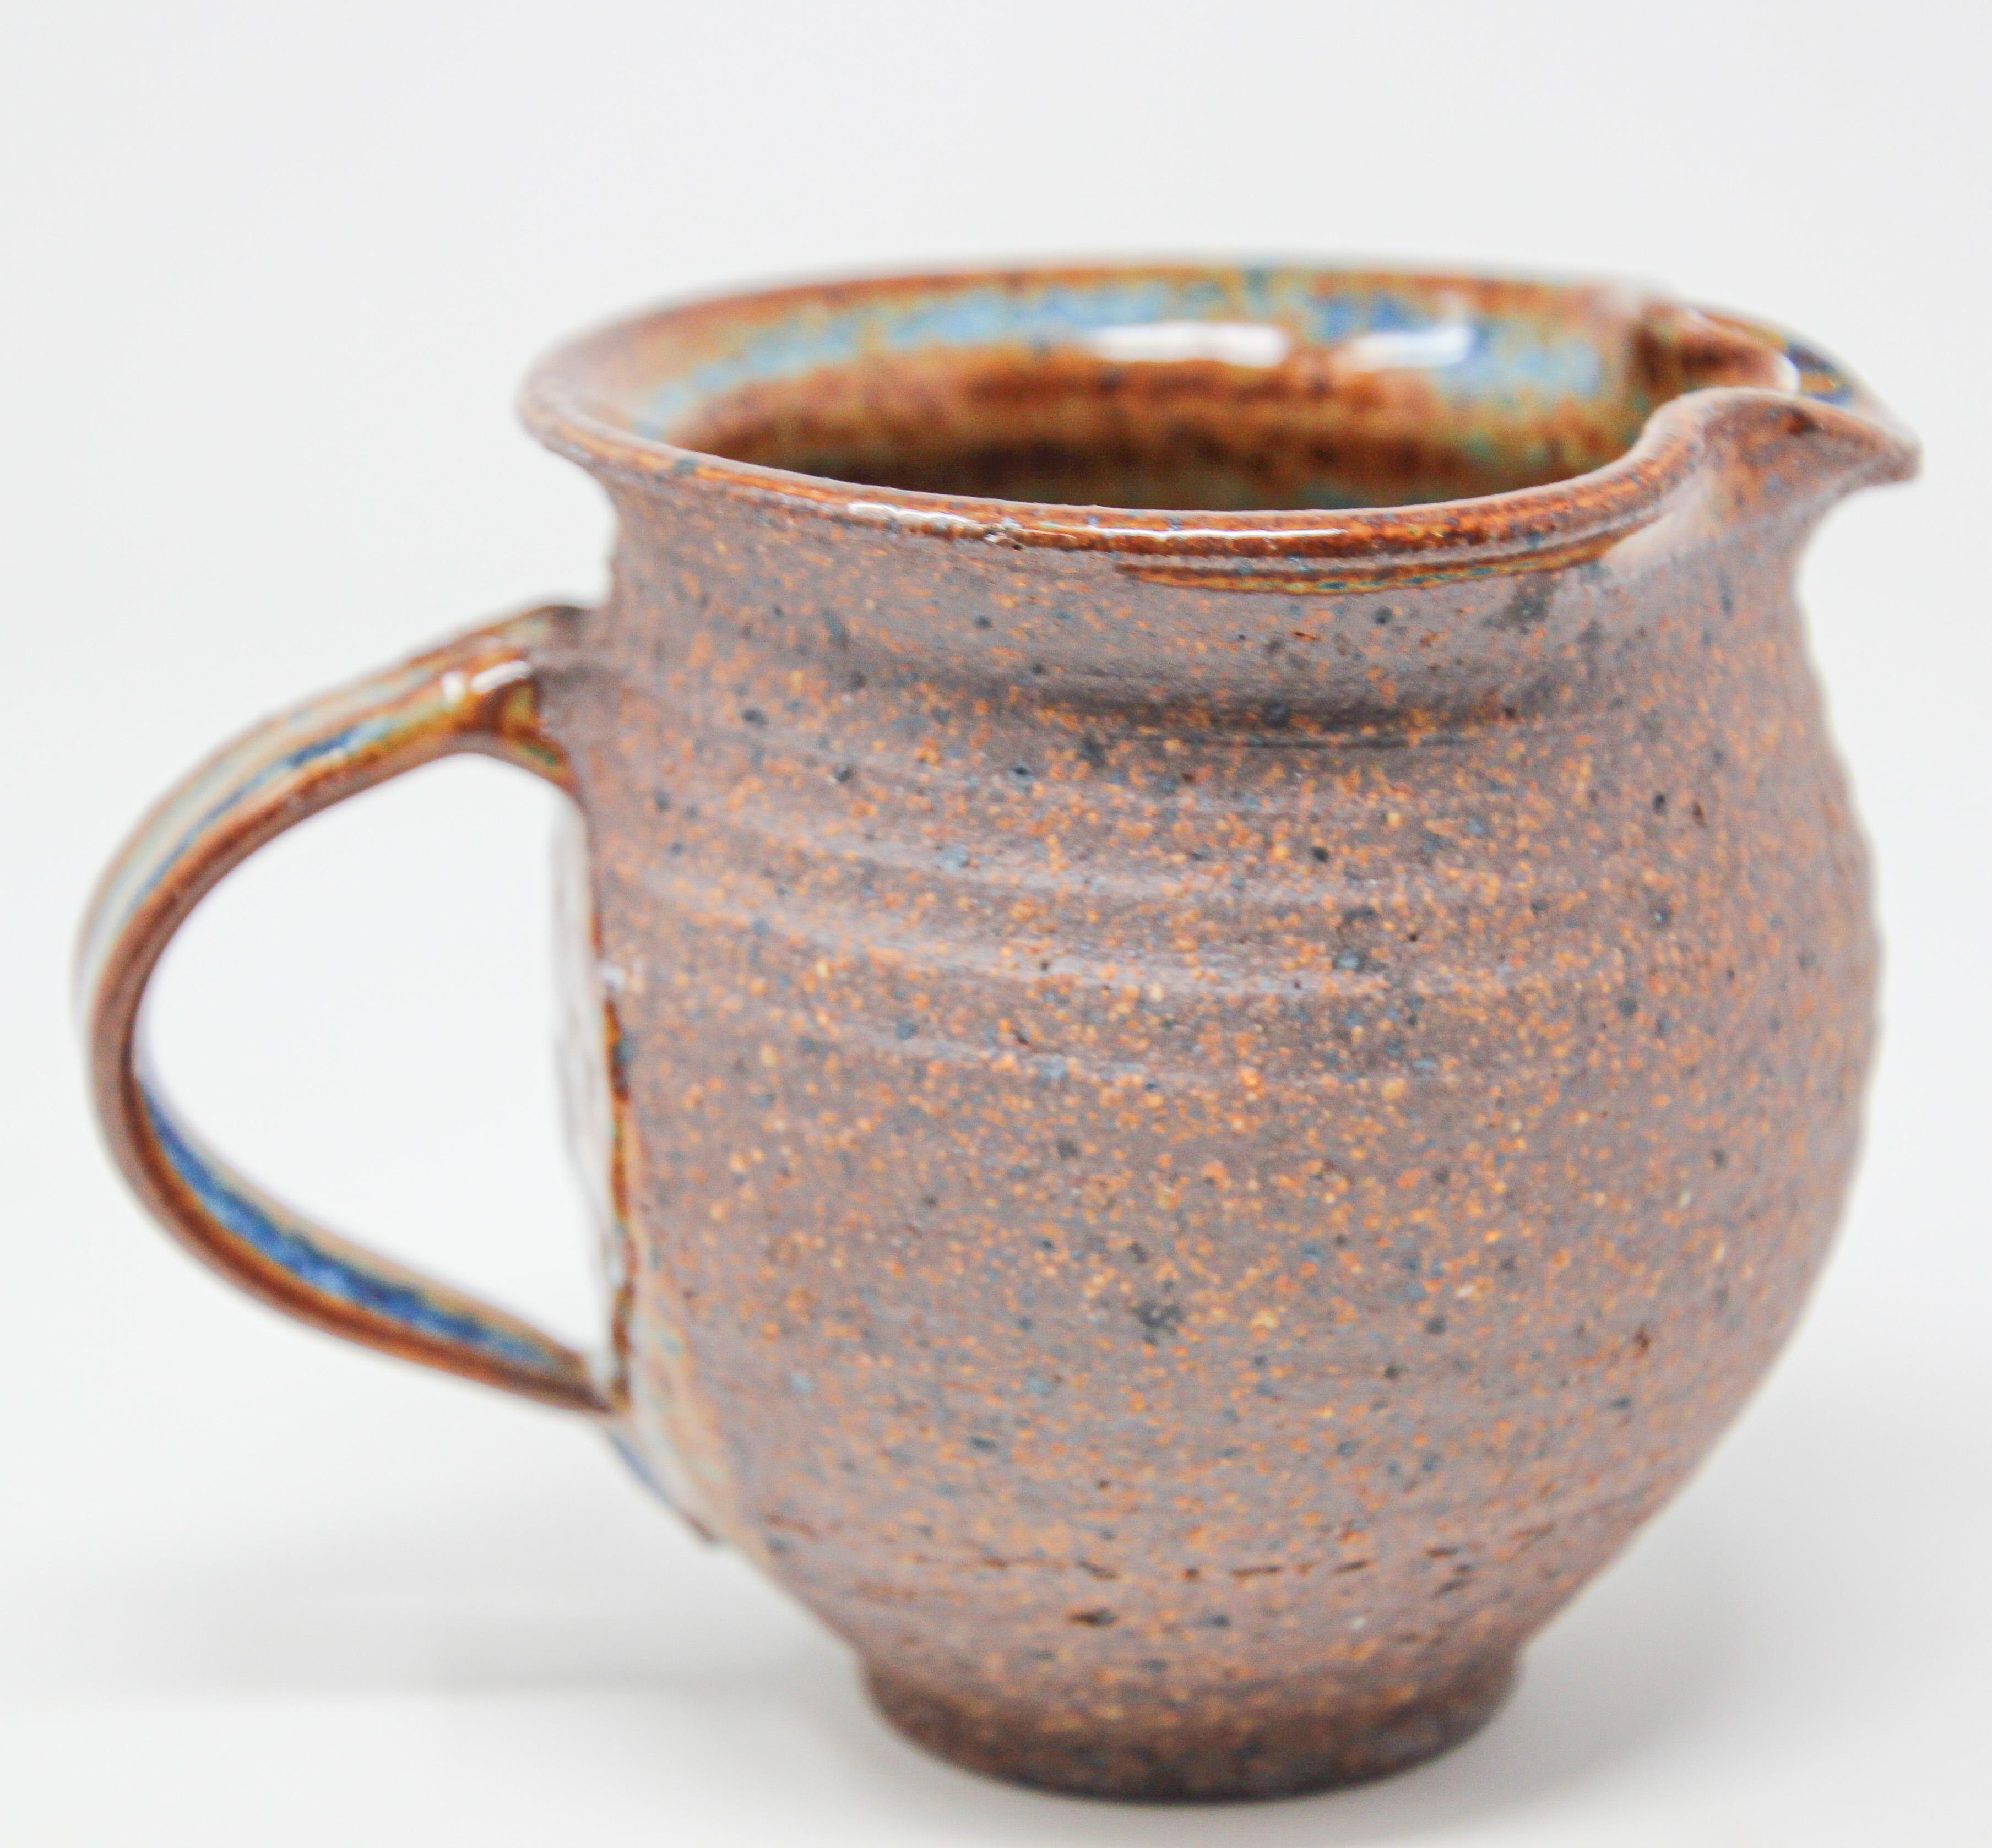 Vintage American hand thrown art Pottery Jug Artisan stoneware
This is a vintage handcrafted American studio art Pottery blue glazed small pitcher.
Superb pottery jug immaculate hand thrown studio ceramics artisan stoneware.
It is beautifully glazed